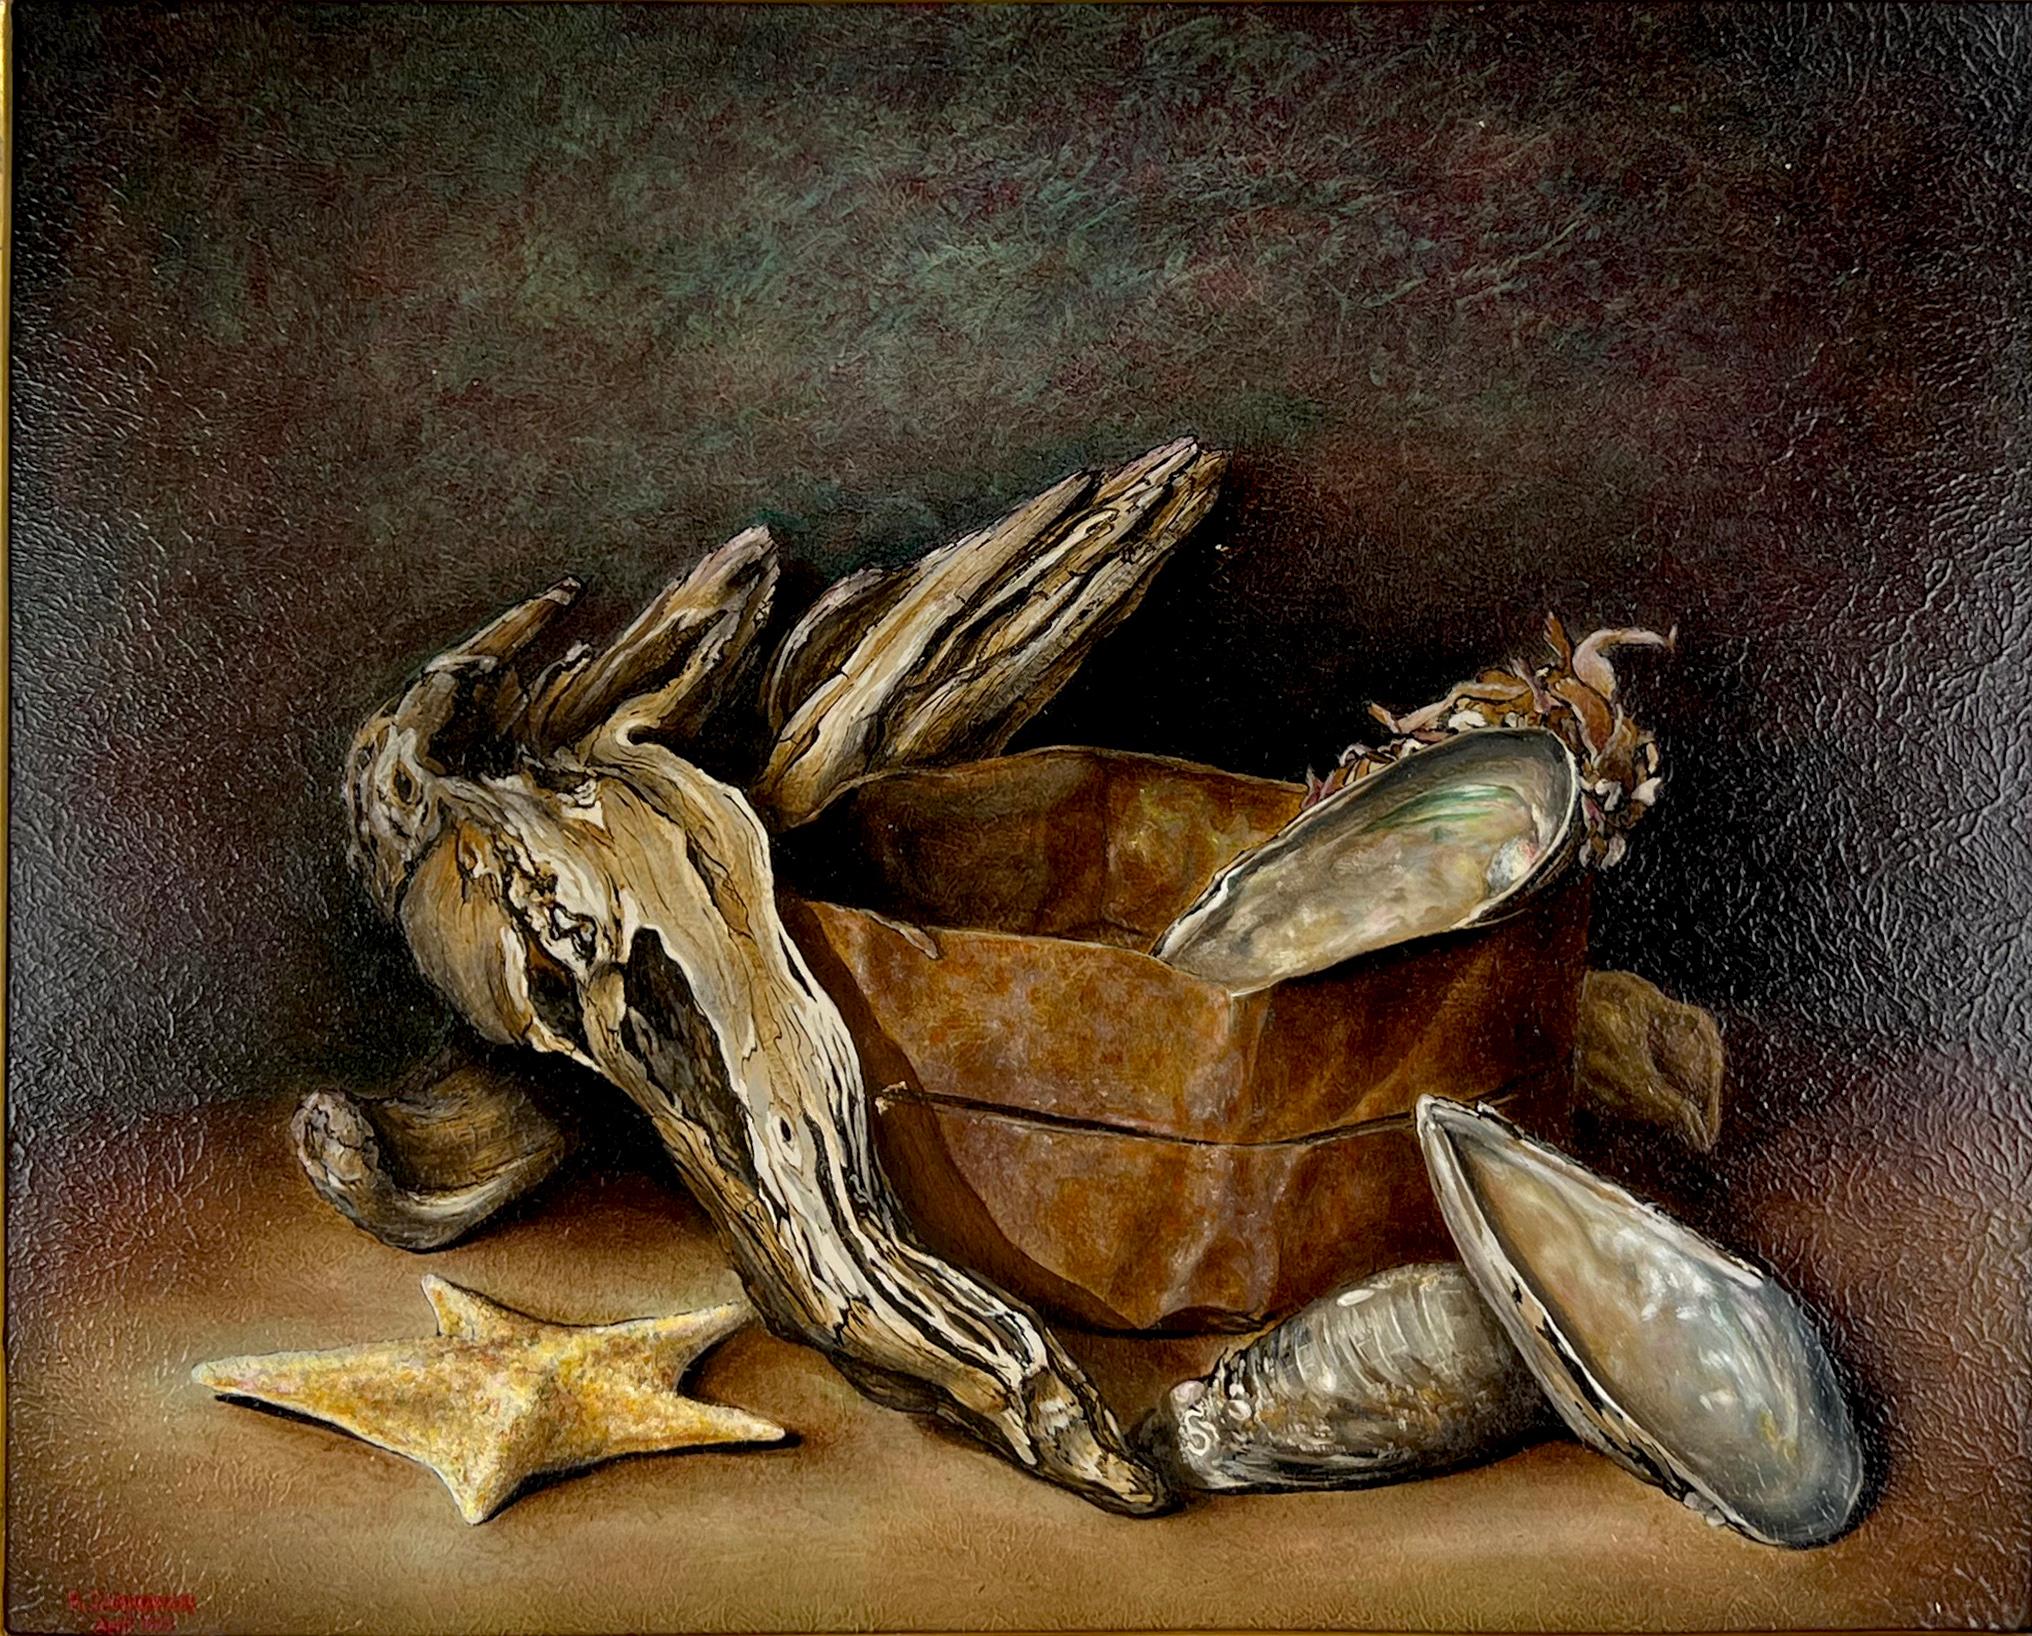  Vintage Still Life with Abalone Shells and Driftwood Influenced by Claude Buck - Painting by Tony Jankowski